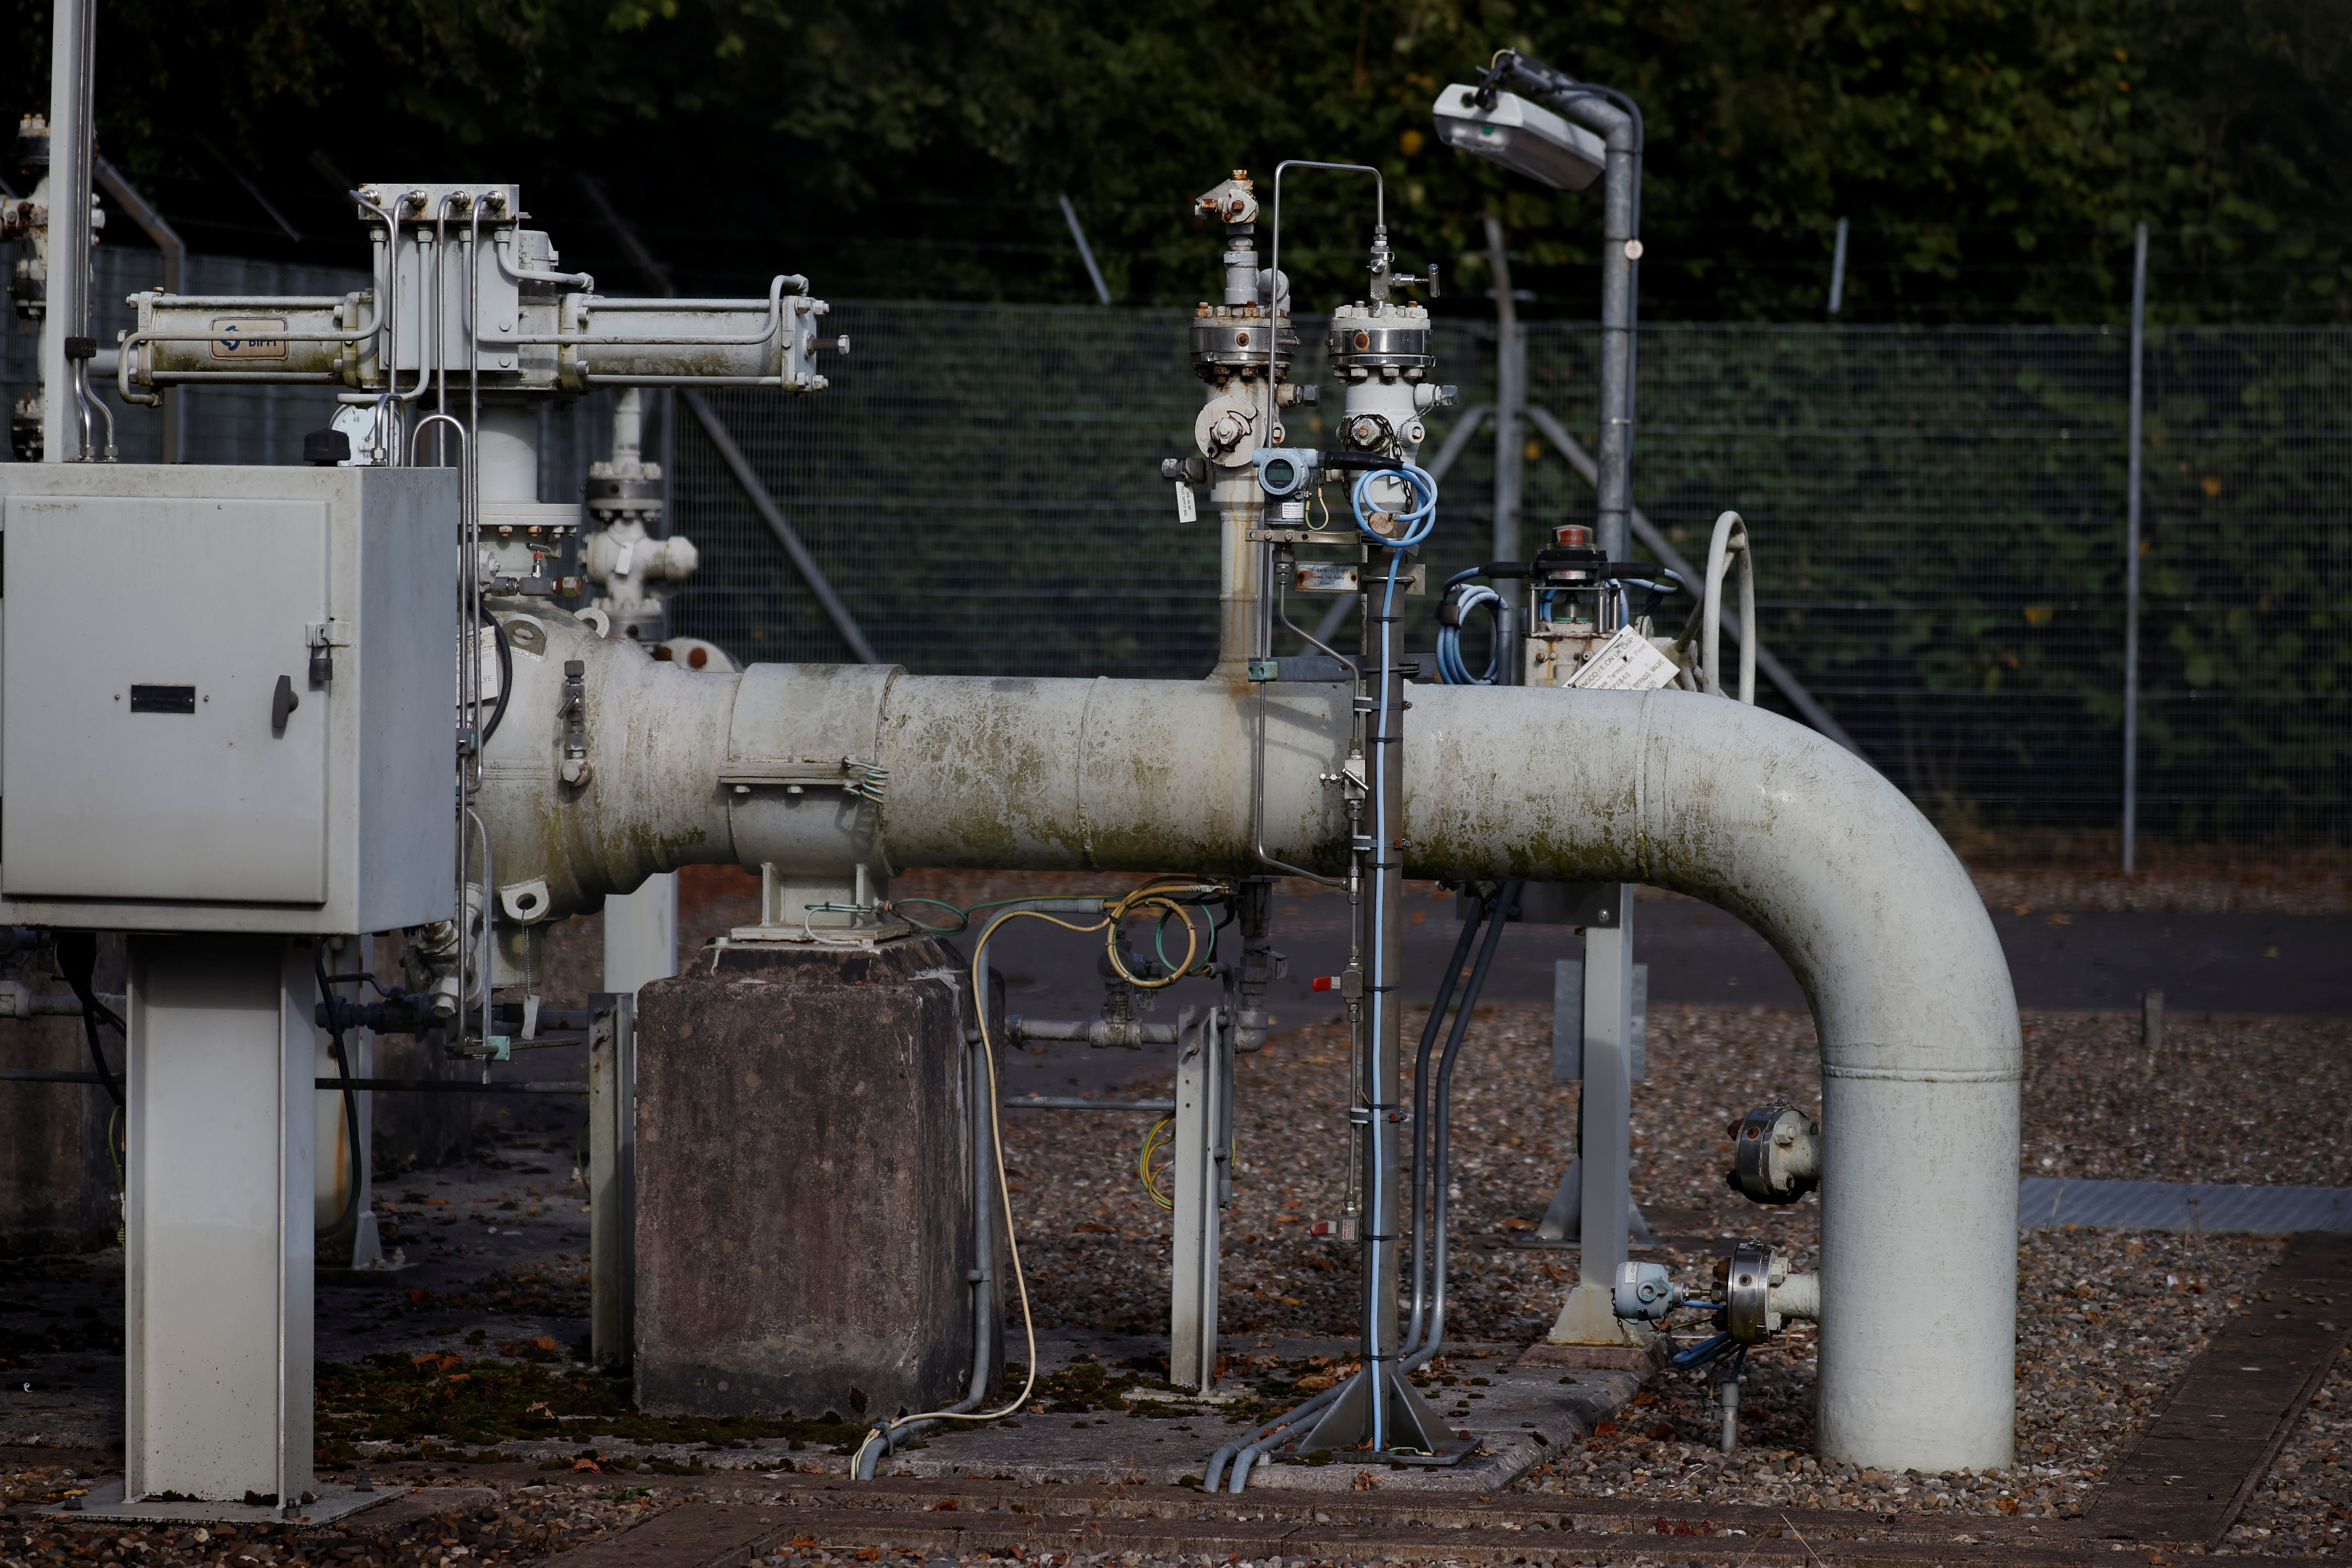 FILE PHOTO - A section of gas pipeline is seen at a National Grid facility near Knutsford